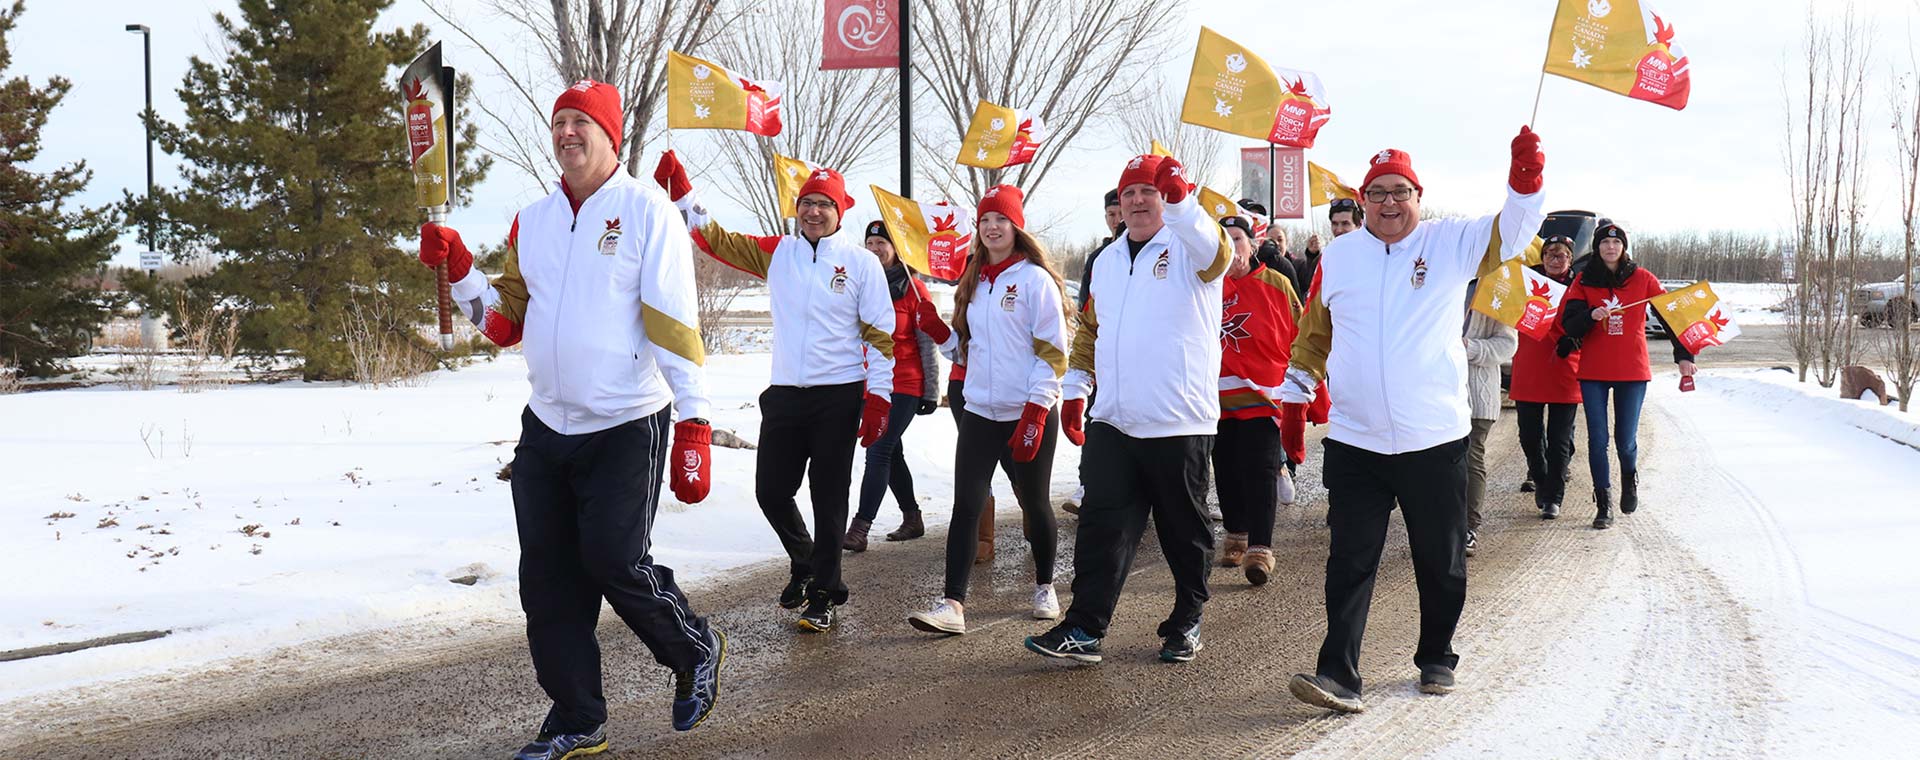 Join us as we countdown to the 2019 Canada Winter Games